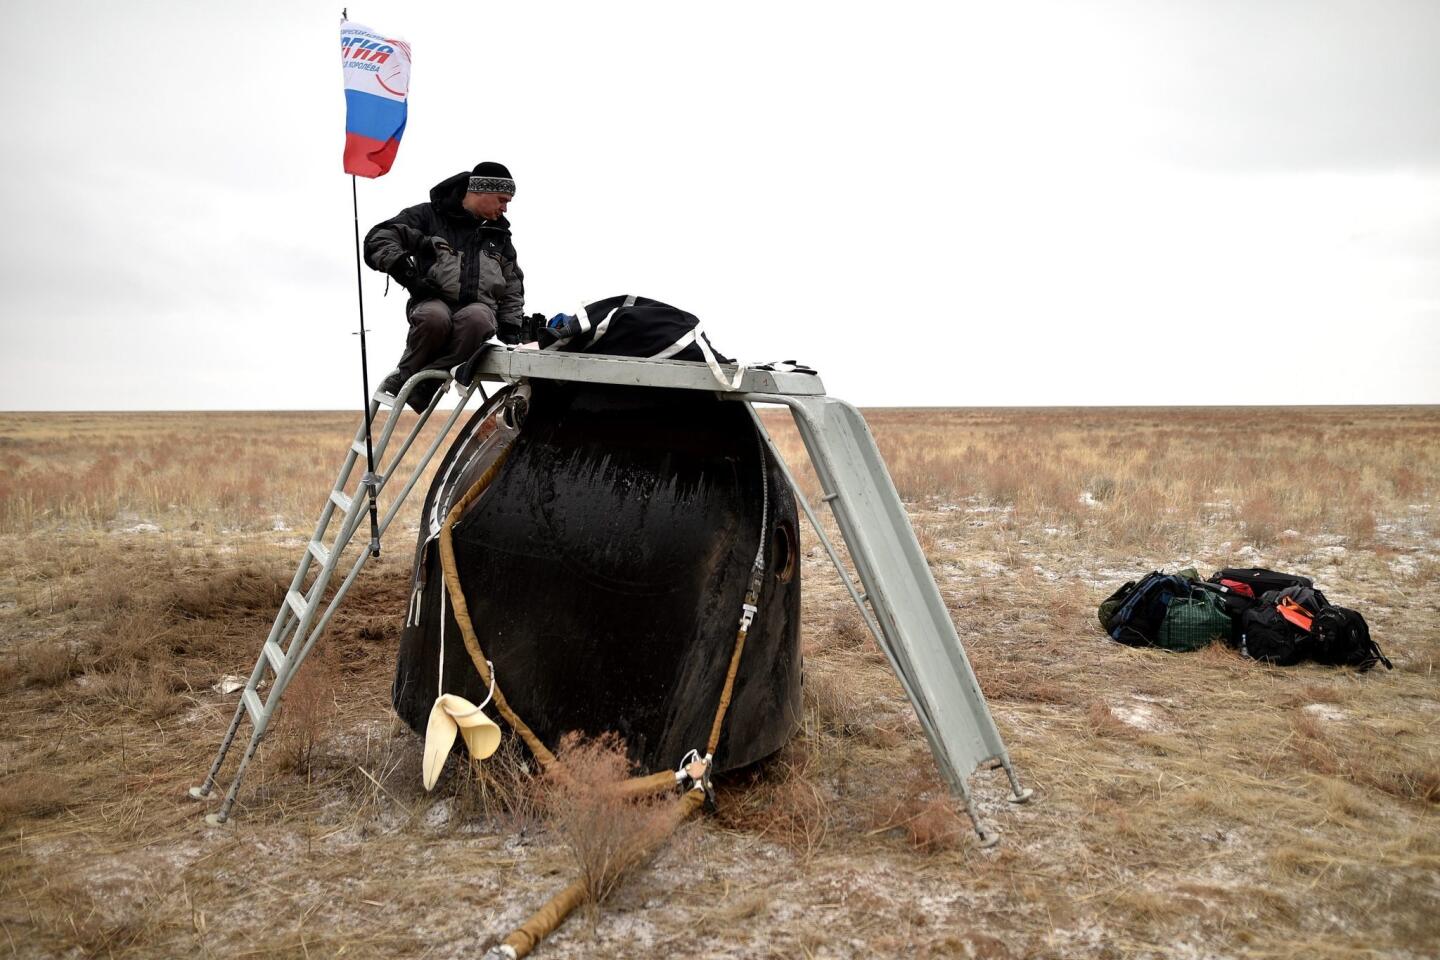 A member of the search and rescue team works at the site of landing of the Soyuz TMA-18M space capsule carrying the International Space Station (ISS) crew of US astronaut Scott Kelly and Russian cosmonauts Mikhail Kornienko and Sergei Volkov near the town of Dzhezkazgan (Zhezkazgan), Kazakhstan.